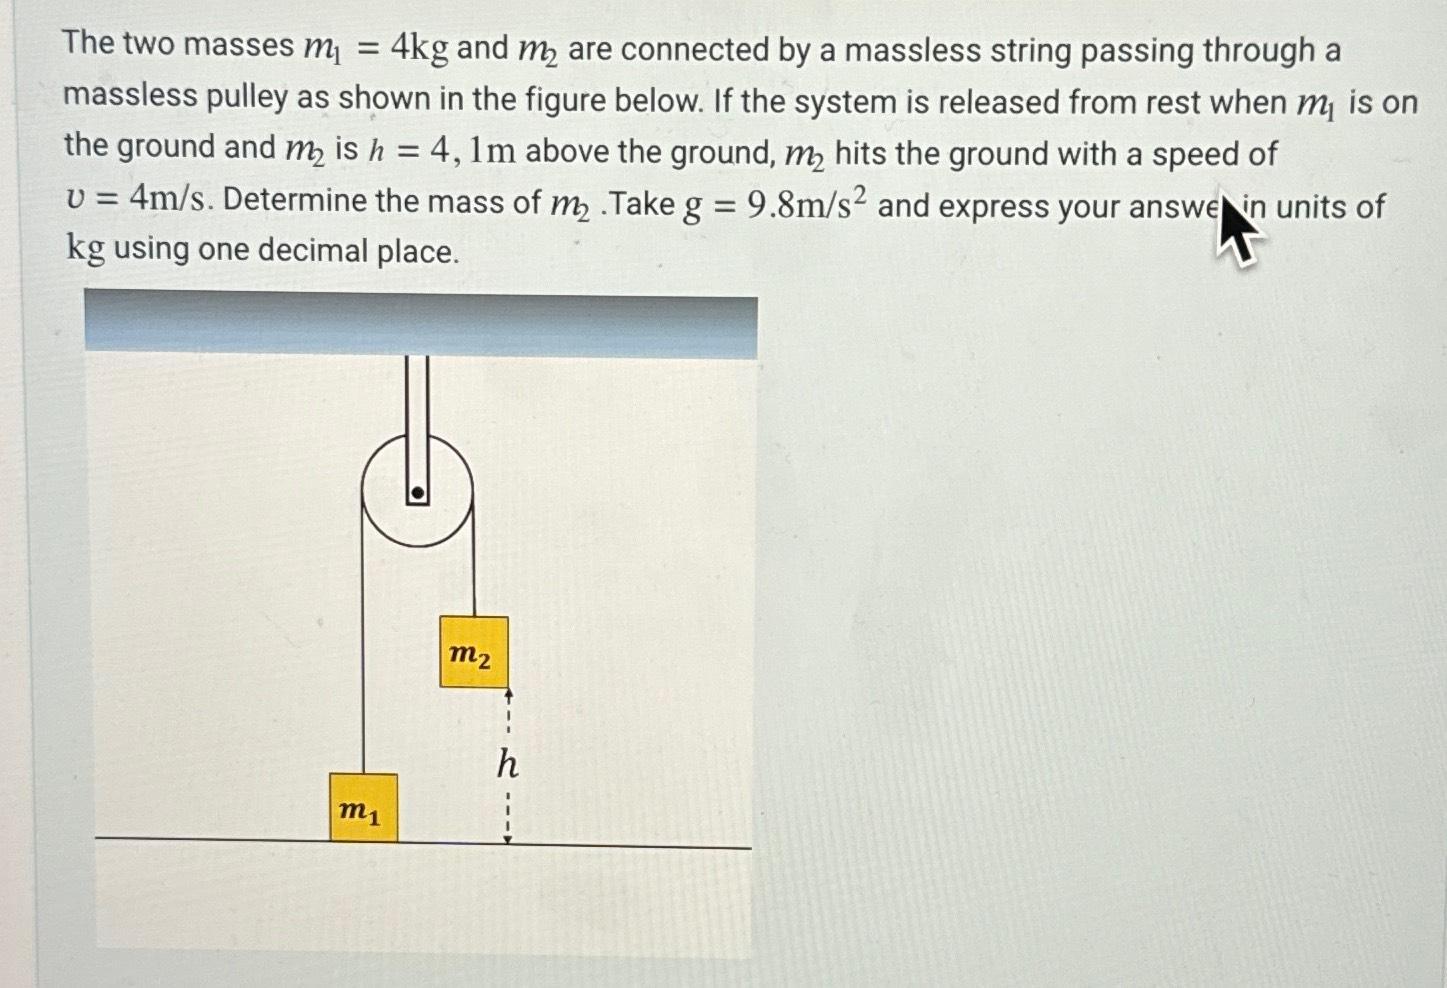 The two masses m = 4kg and m are connected by a massless string passing through a massless pulley as shown in